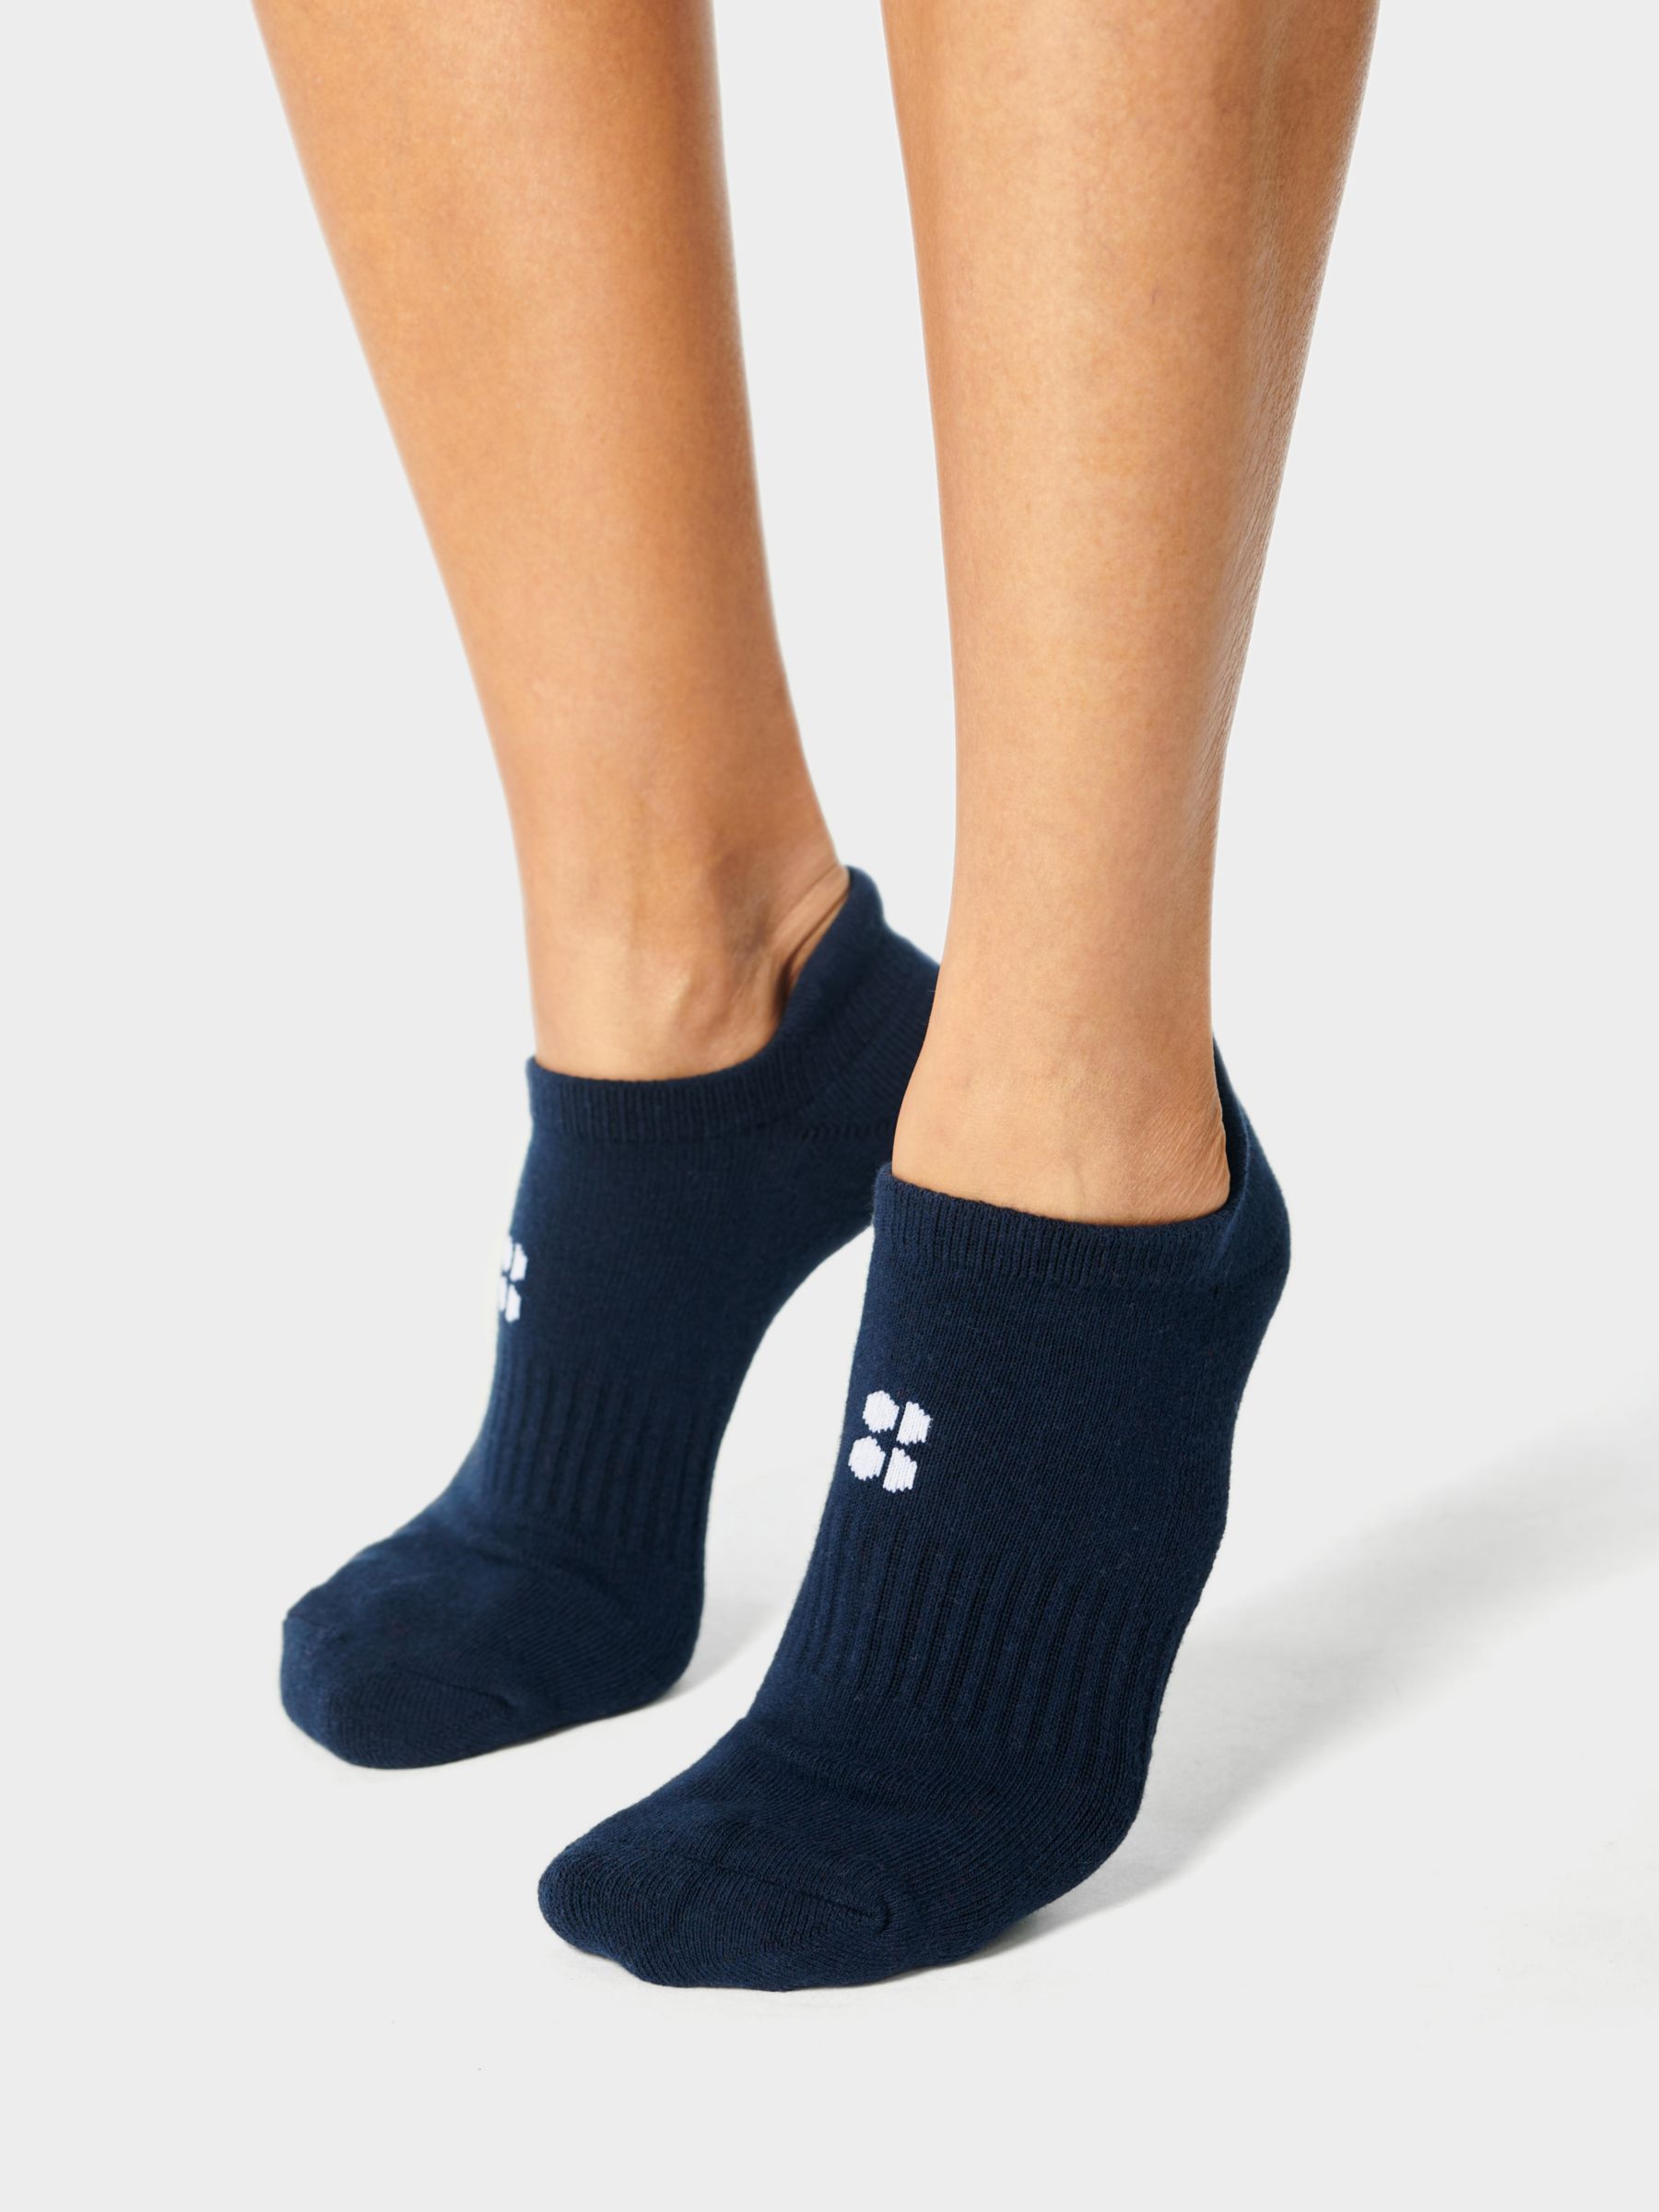 Buy Sweaty Betty Workout Trainer Socks, Pack of 3, Vine Red/Multi Online at johnlewis.com